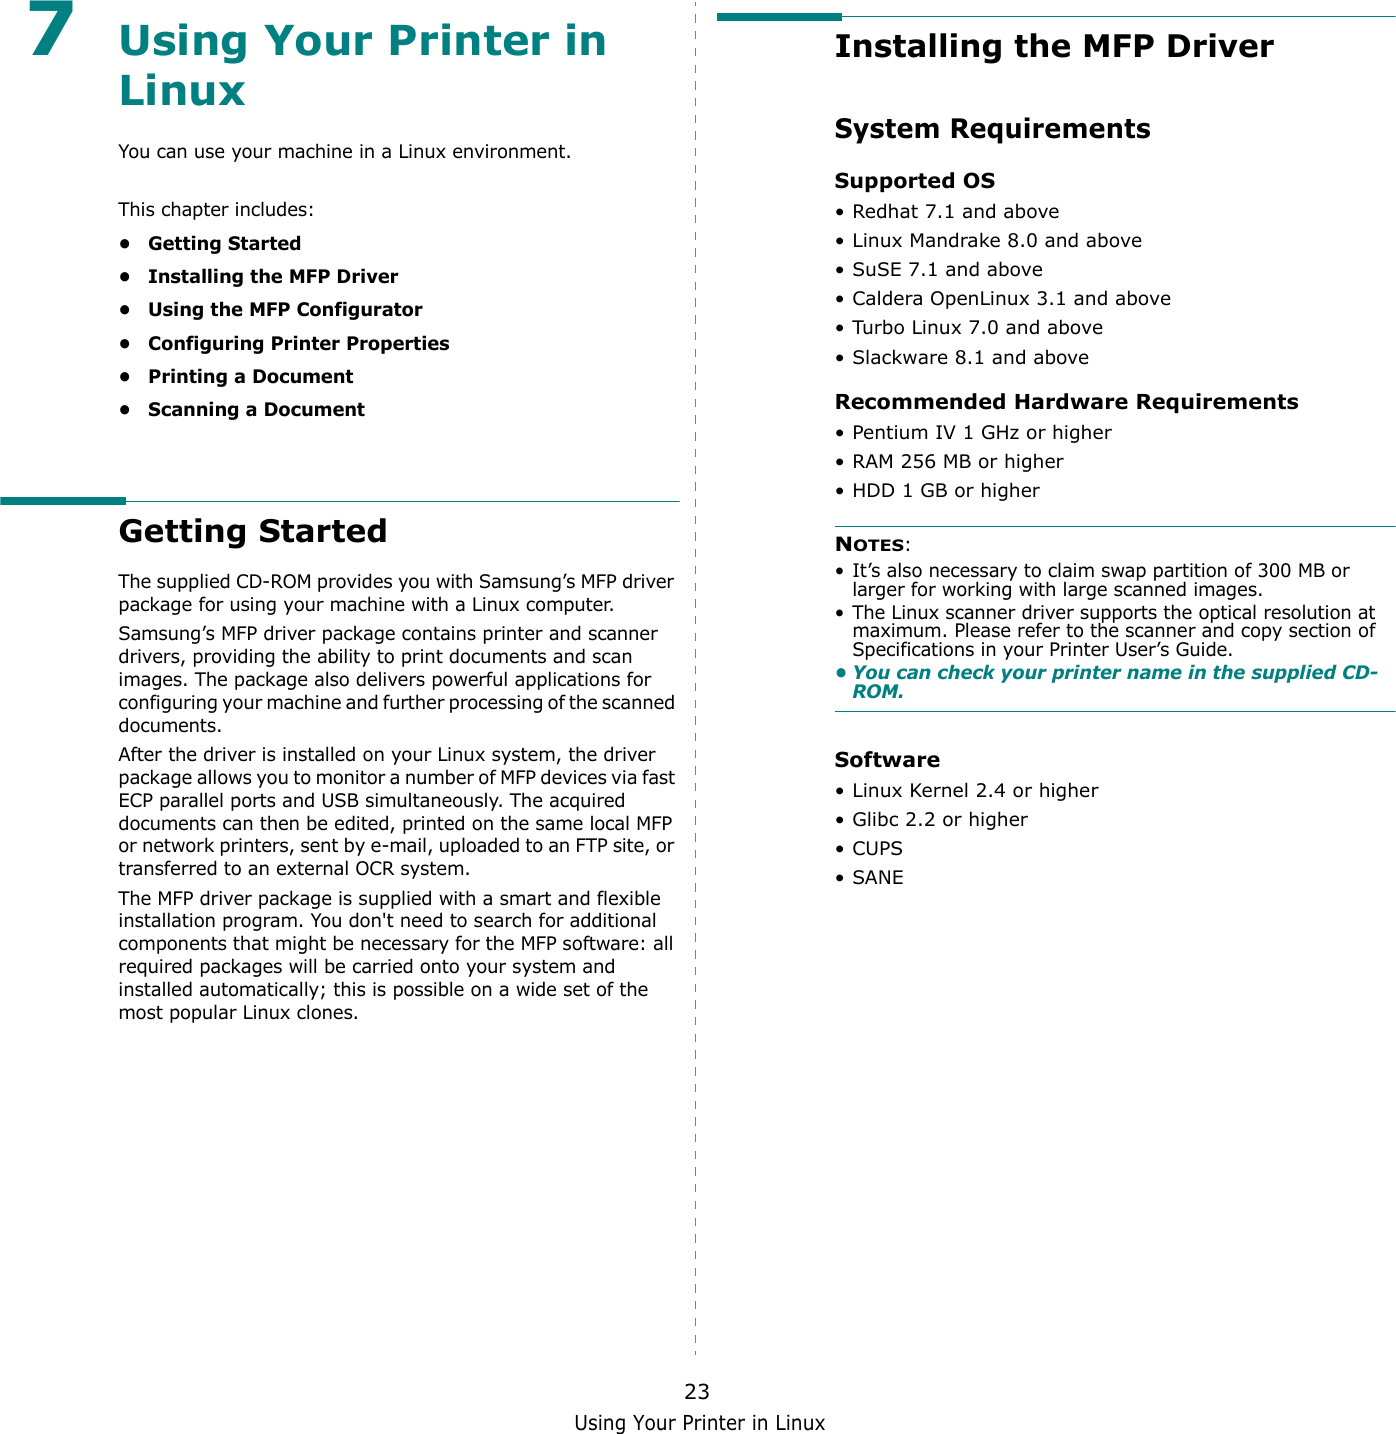 Using Your Printer in Linux237Using Your Printer in Linux You can use your machine in a Linux environment. This chapter includes:• Getting Started• Installing the MFP Driver• Using the MFP Configurator• Configuring Printer Properties• Printing a Document• Scanning a DocumentGetting StartedThe supplied CD-ROM provides you with Samsung’s MFP driver package for using your machine with a Linux computer.Samsung’s MFP driver package contains printer and scanner drivers, providing the ability to print documents and scan images. The package also delivers powerful applications for configuring your machine and further processing of the scanned documents.After the driver is installed on your Linux system, the driver package allows you to monitor a number of MFP devices via fast ECP parallel ports and USB simultaneously. The acquired documents can then be edited, printed on the same local MFP or network printers, sent by e-mail, uploaded to an FTP site, or transferred to an external OCR system.The MFP driver package is supplied with a smart and flexible installation program. You don&apos;t need to search for additional components that might be necessary for the MFP software: all required packages will be carried onto your system and installed automatically; this is possible on a wide set of the most popular Linux clones.Installing the MFP DriverSystem Requirements Supported OS• Redhat 7.1 and above• Linux Mandrake 8.0 and above• SuSE 7.1 and above• Caldera OpenLinux 3.1 and above• Turbo Linux 7.0 and above• Slackware 8.1 and aboveRecommended Hardware Requirements• Pentium IV 1 GHz or higher• RAM 256 MB or higher• HDD 1 GB or higherNOTES: • It’s also necessary to claim swap partition of 300 MB or larger for working with large scanned images.• The Linux scanner driver supports the optical resolution at maximum. Please refer to the scanner and copy section of Specifications in your Printer User’s Guide.• You can check your printer name in the supplied CD-ROM.Software• Linux Kernel 2.4 or higher• Glibc 2.2 or higher•CUPS•SANE